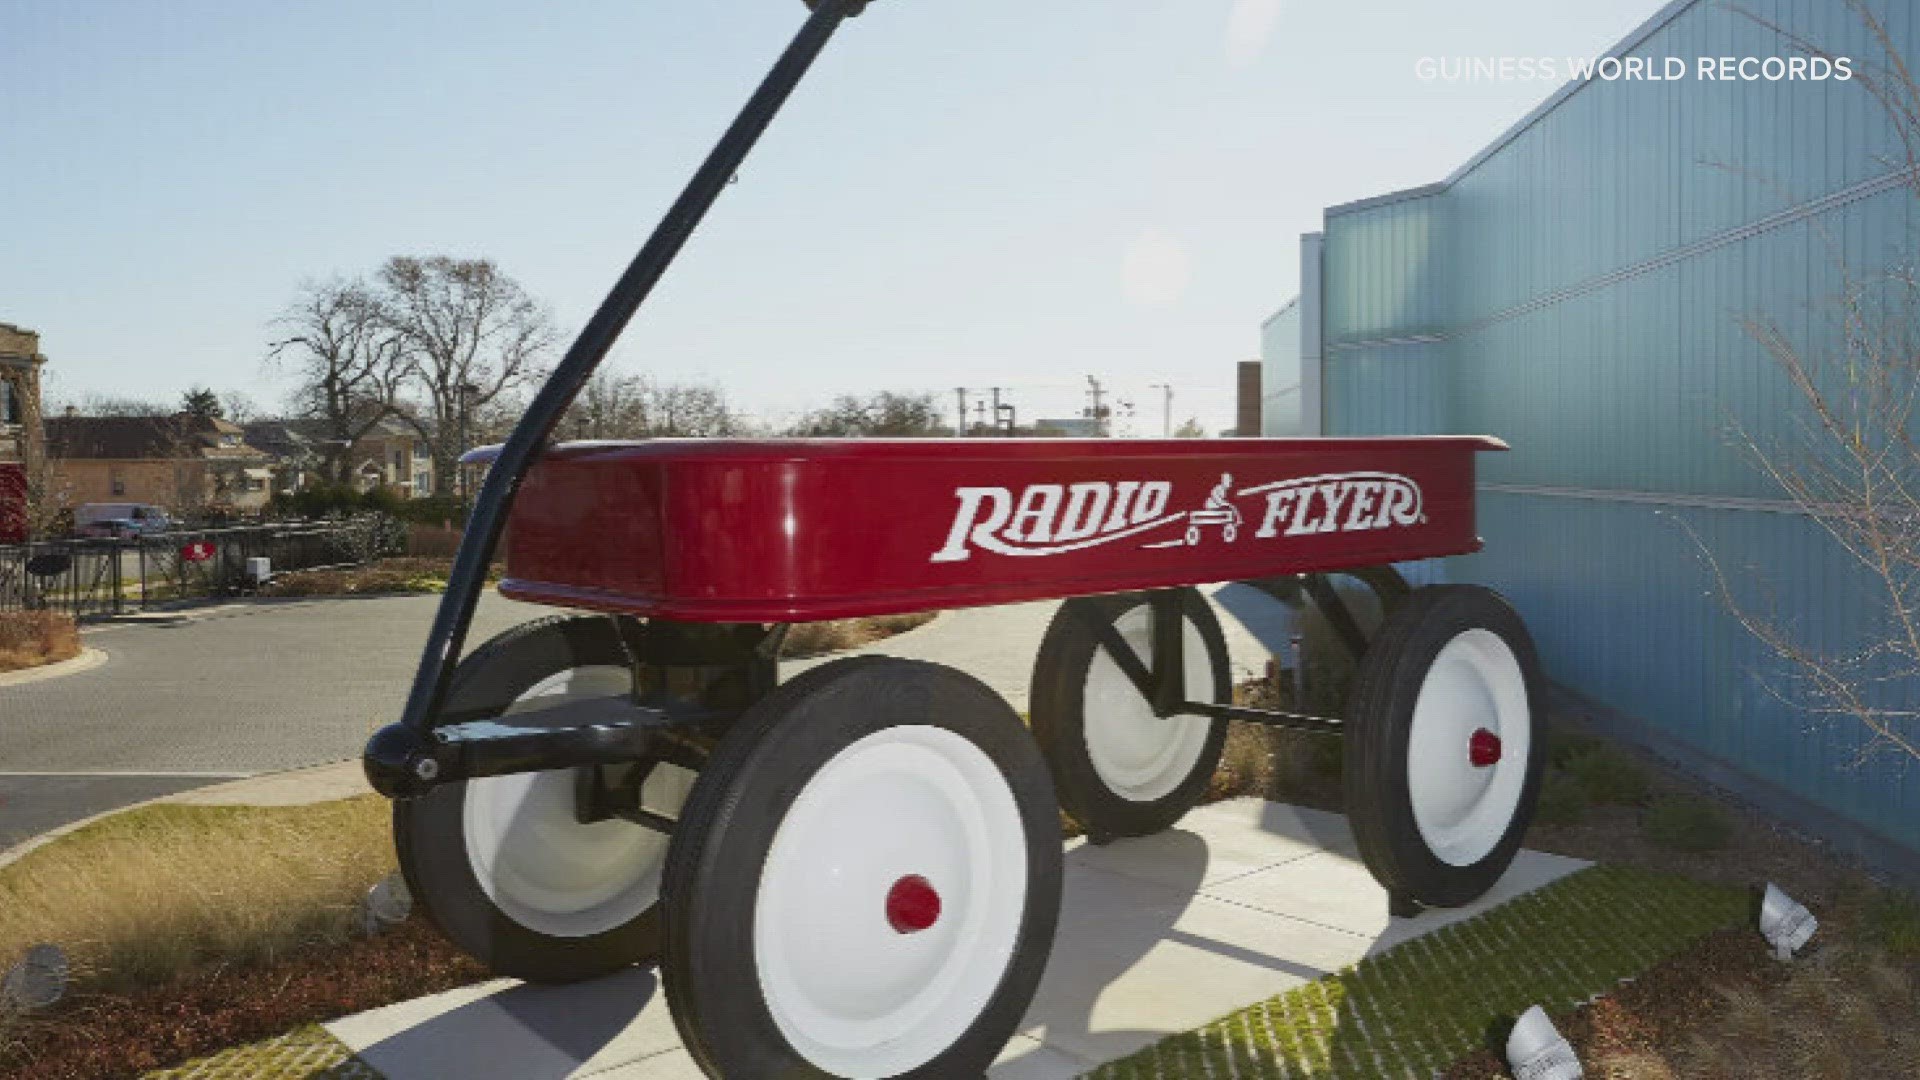 It was first added to the National Day Calendar in 2016. Radio Flyer is the most popular little red wagon brand.